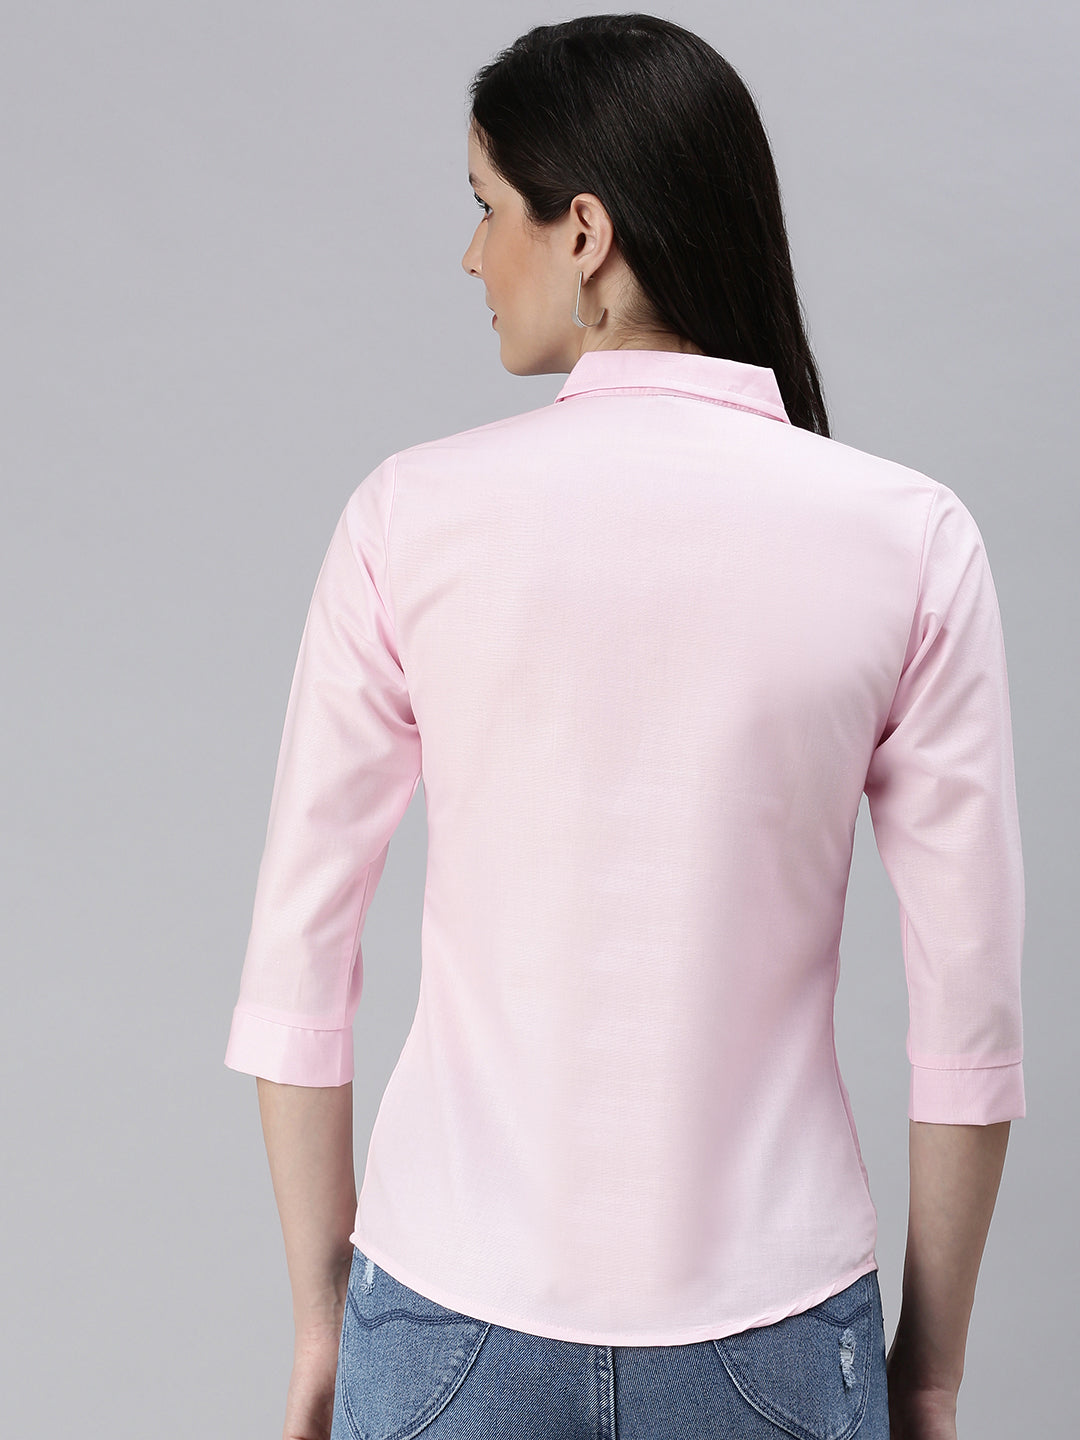 Women's Pink Solid Casual Shirts